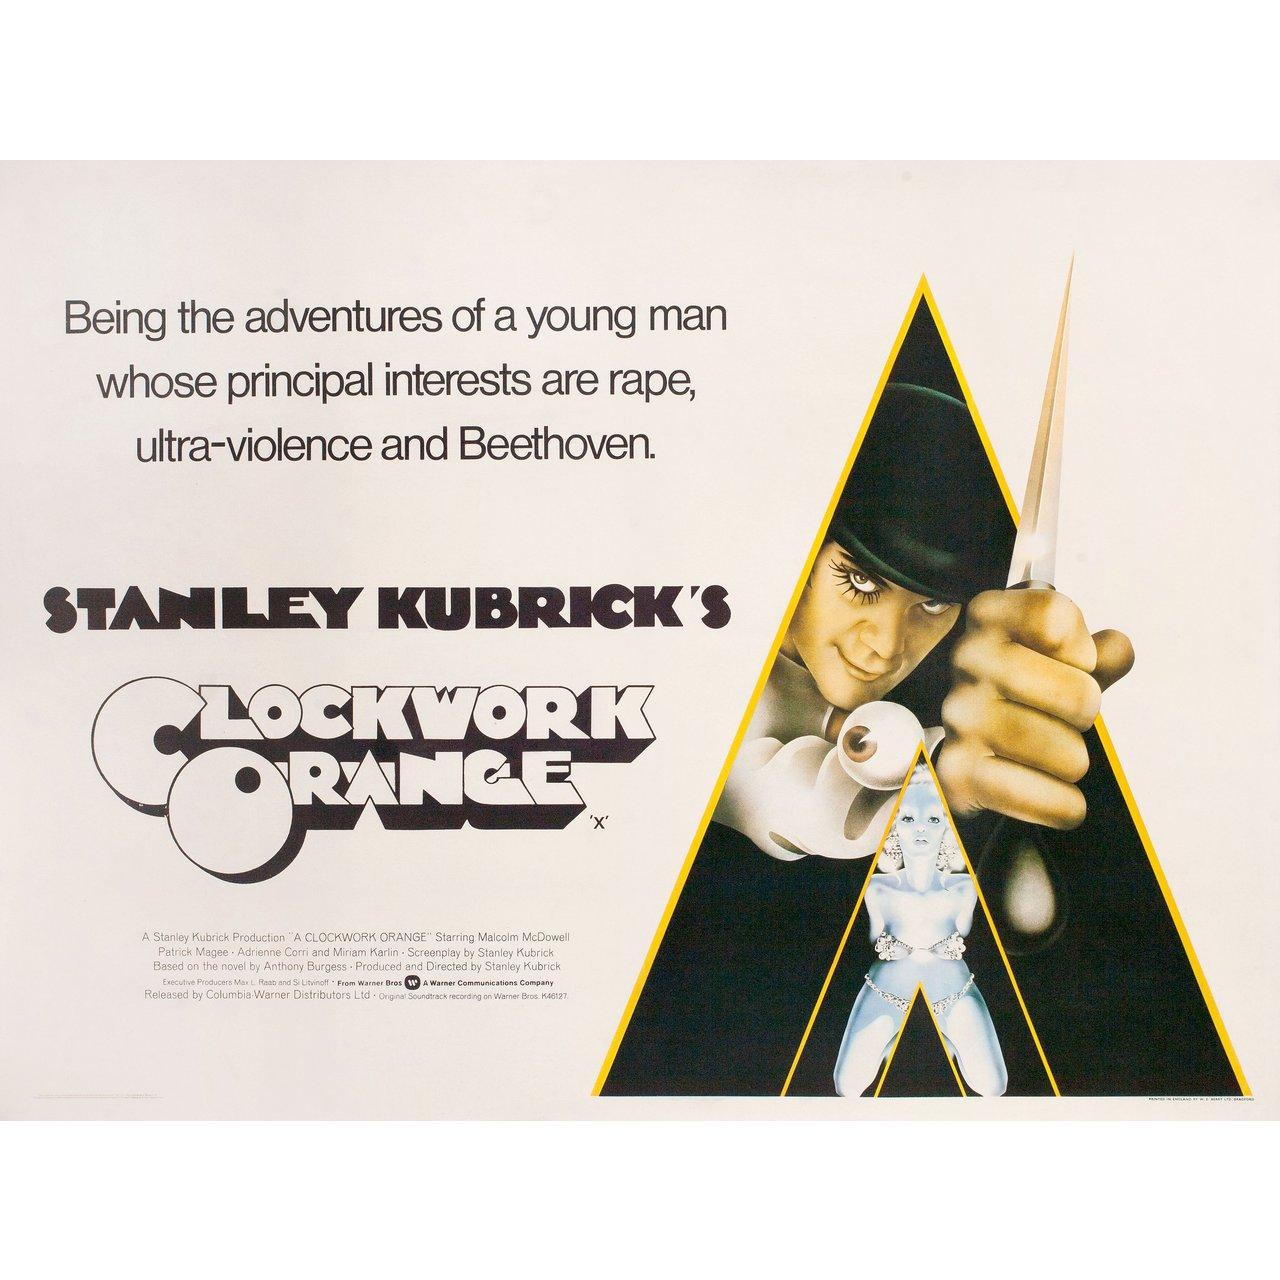 Original 1972 British quad poster by Philip Castle for the film A Clockwork Orange directed by Stanley Kubrick with Malcolm McDowell / Patrick Magee / Michael Bates / Warren Clarke. Fine condition, linen-backed. This poster has been professionally